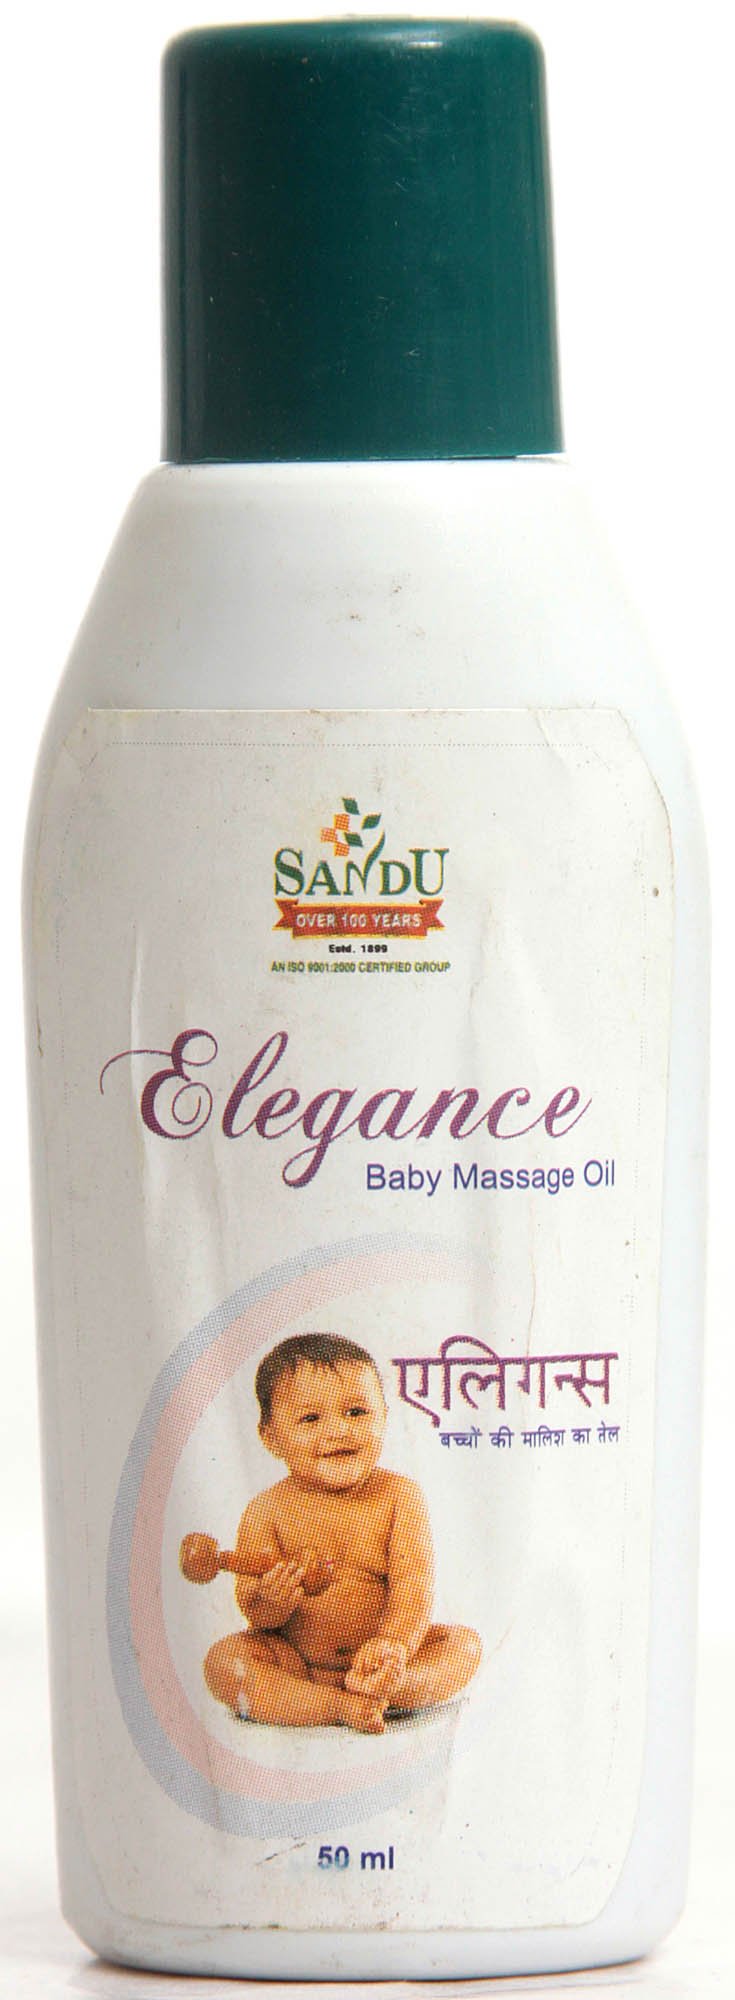 Elegance: Baby Massage Oil - book cover